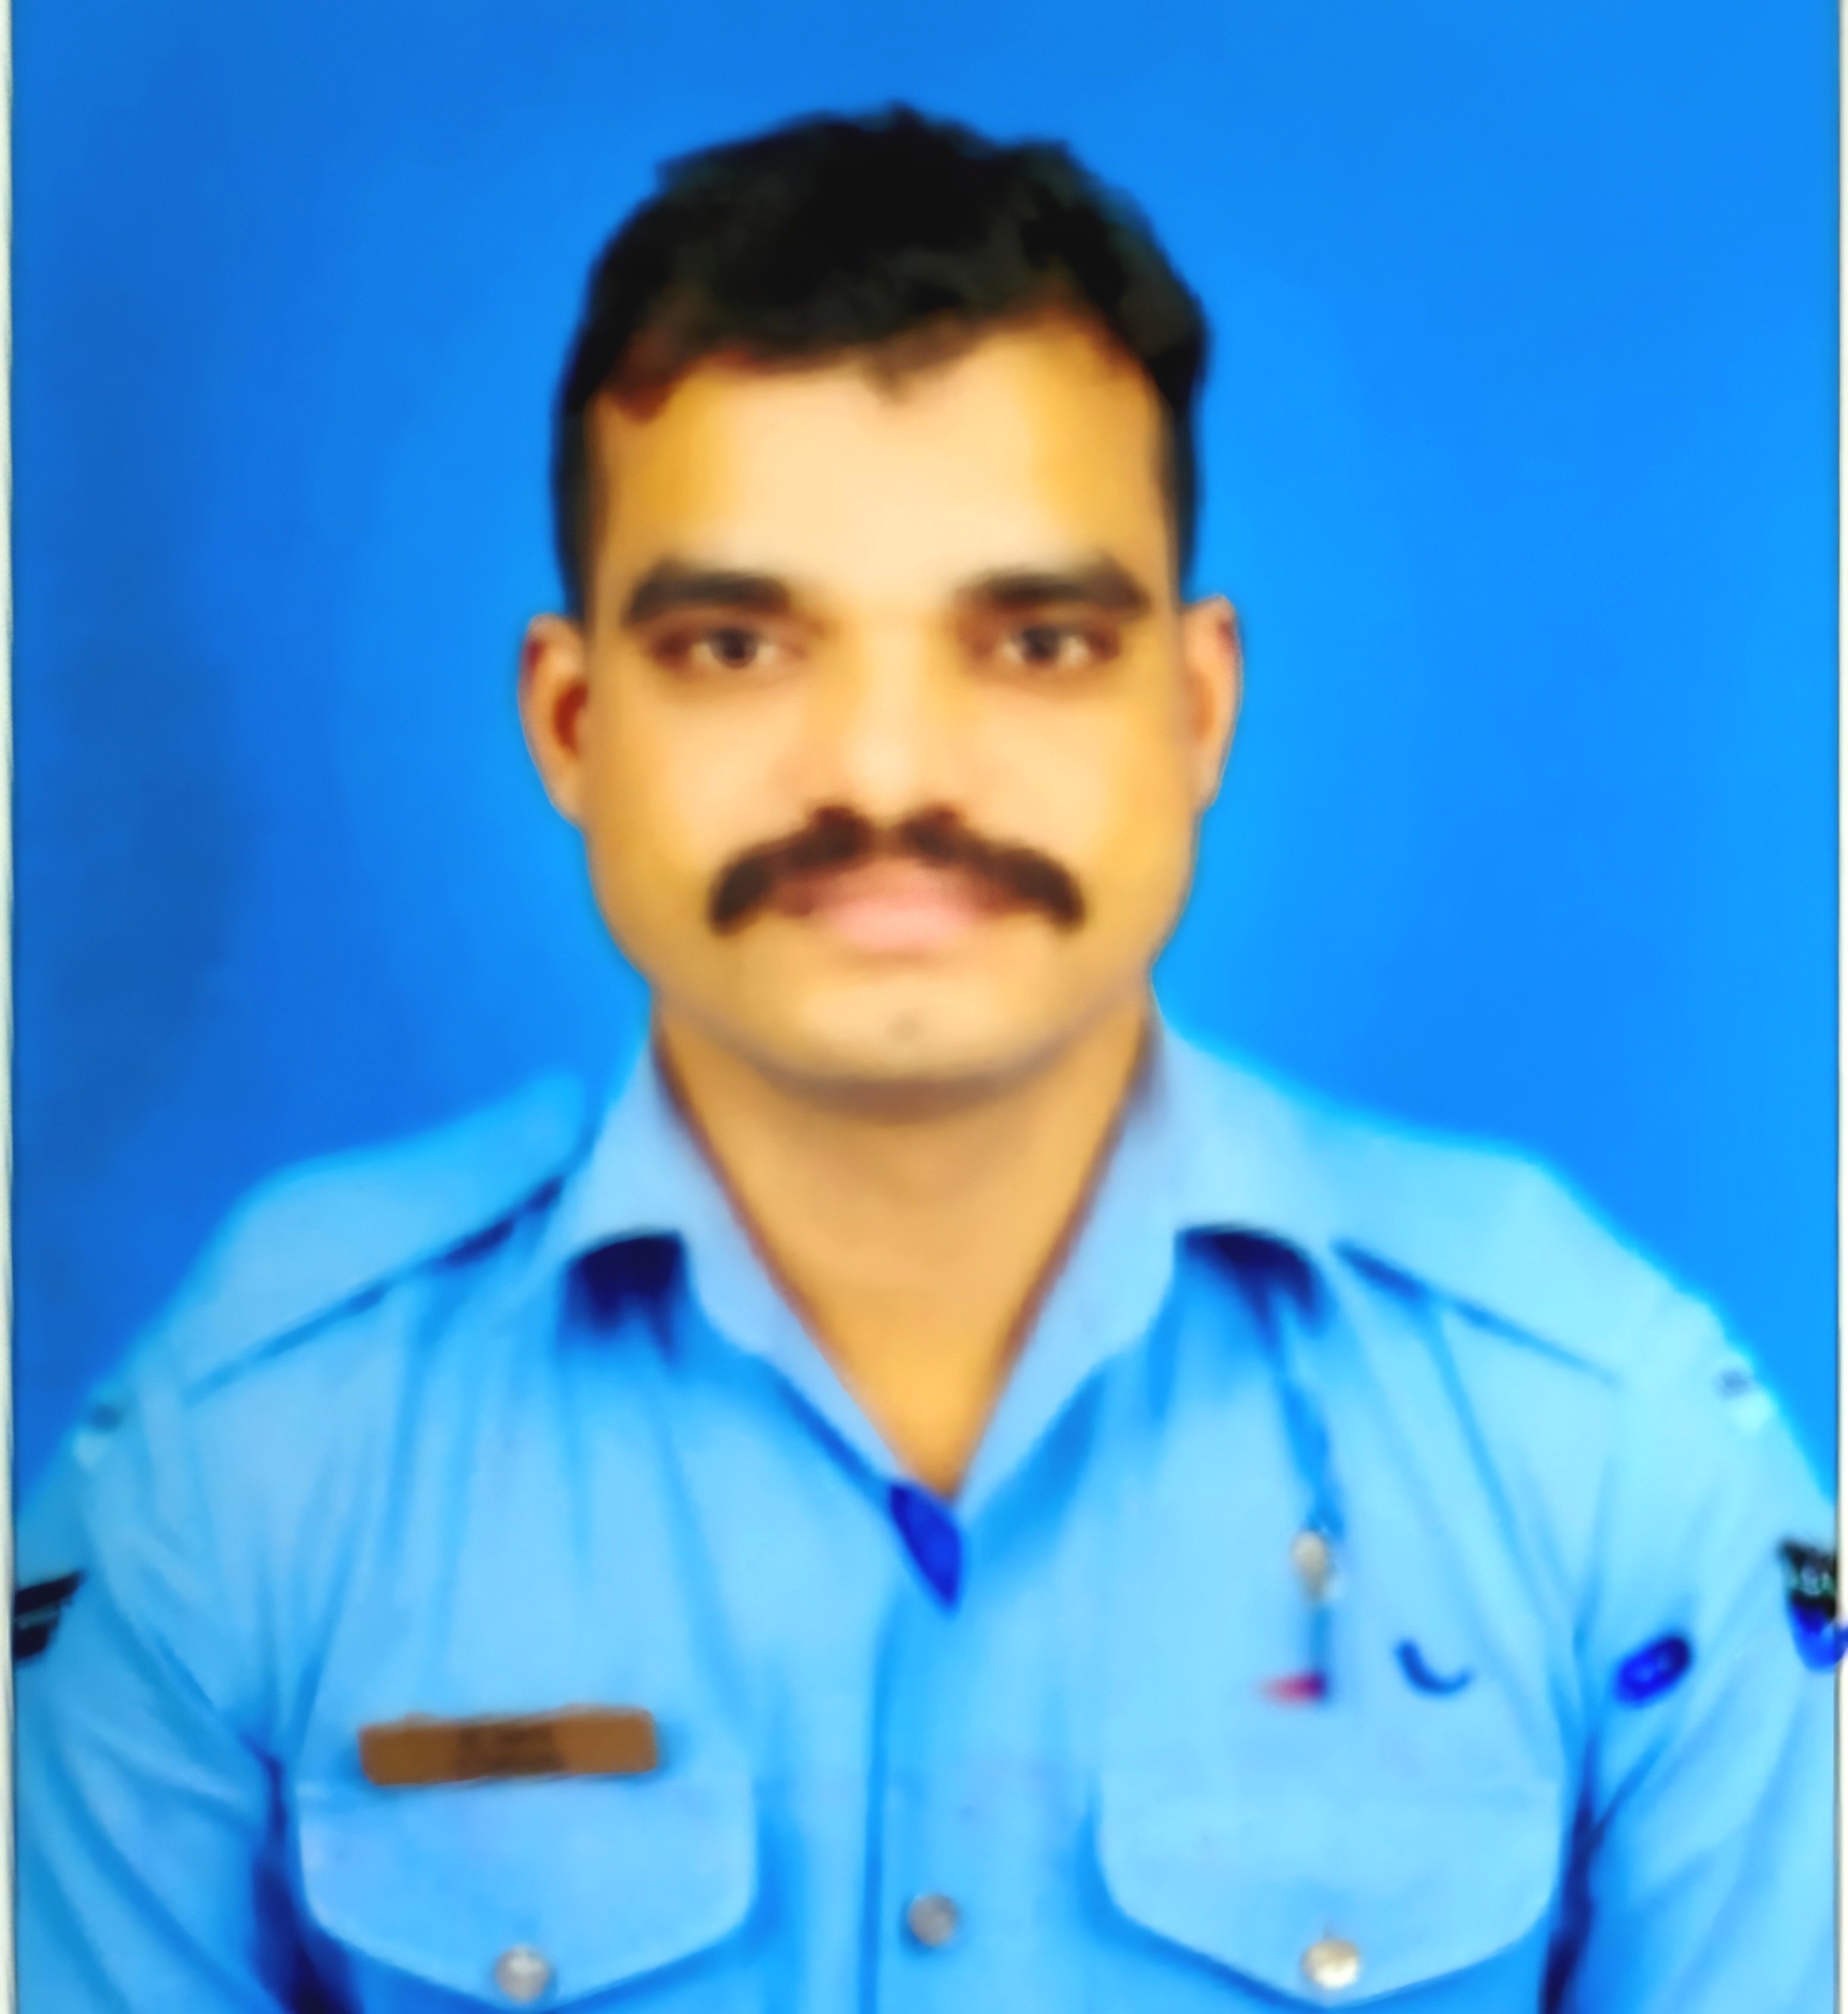 The CAS Air Chief Marshal VR Chaudhari & all personnel of Indian Air Force salute the braveheart Corporal Vikky Pahade, who made the supreme sacrifice in Poonch Sector, in the service of the nation.  Our deepest condolences to the bereaved family. We stan